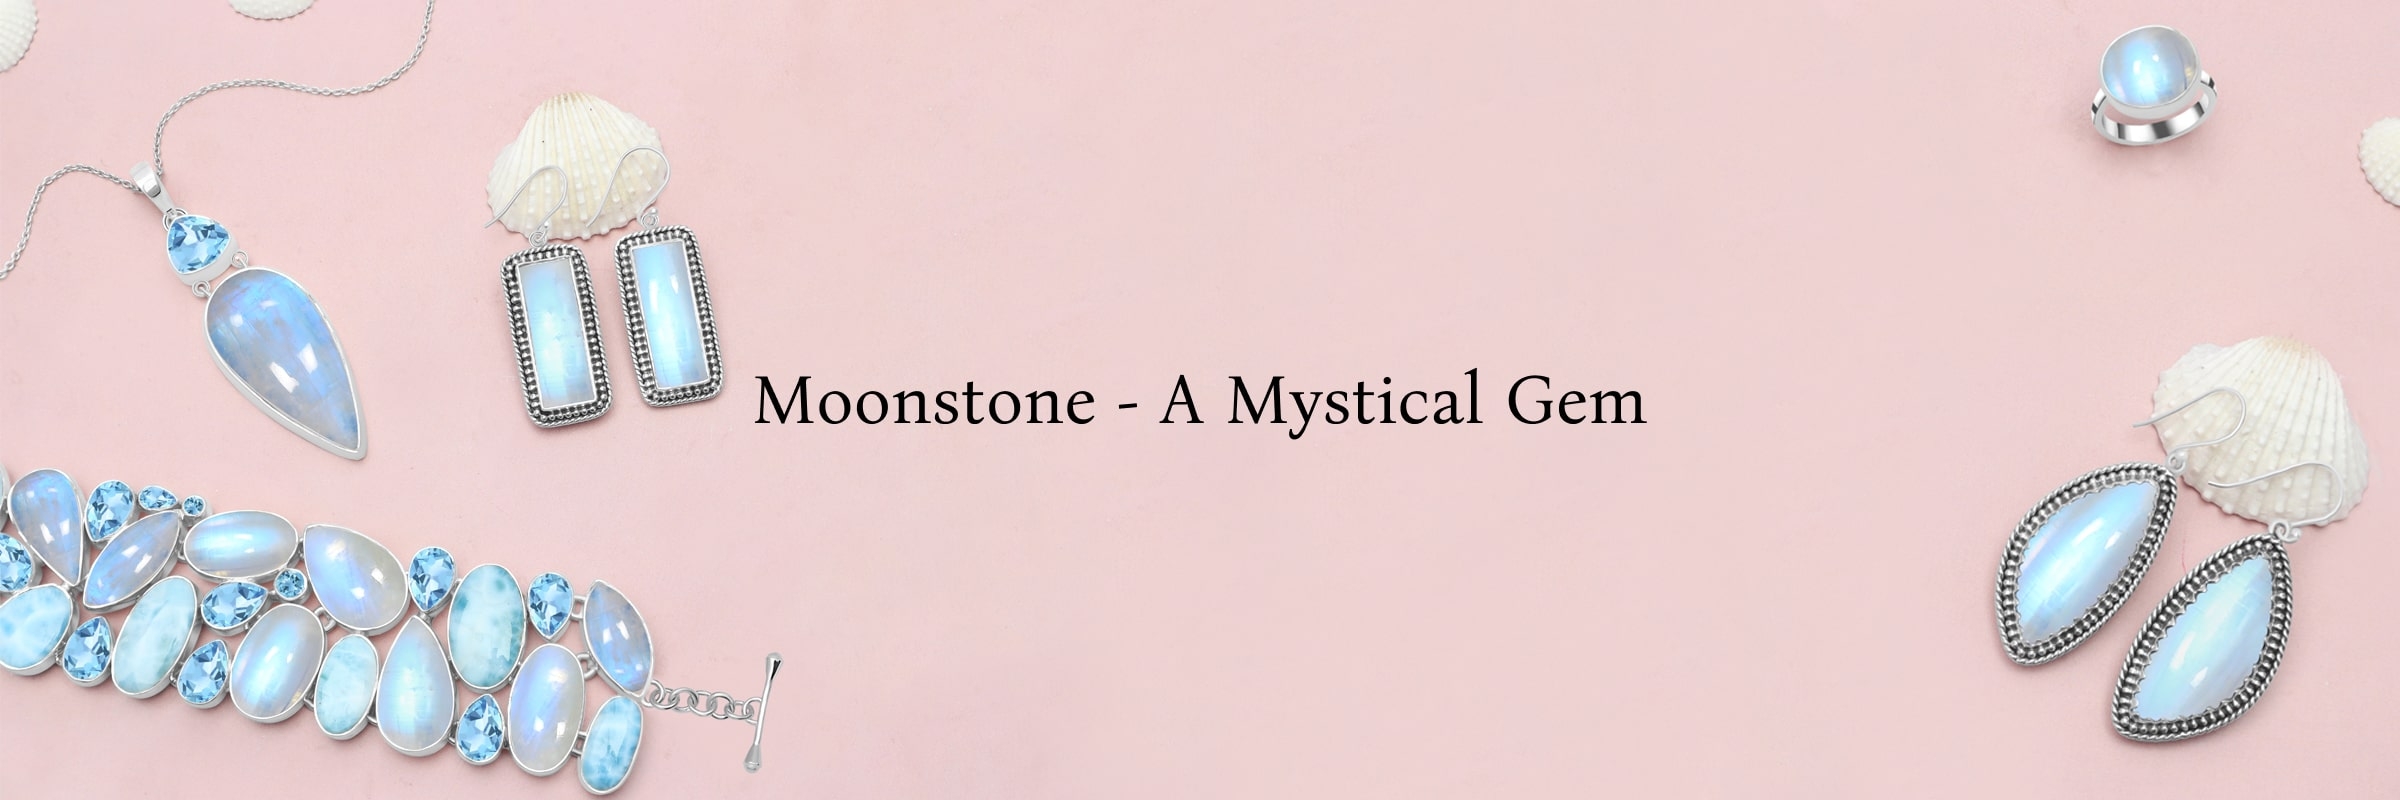 What is a Moonstone?